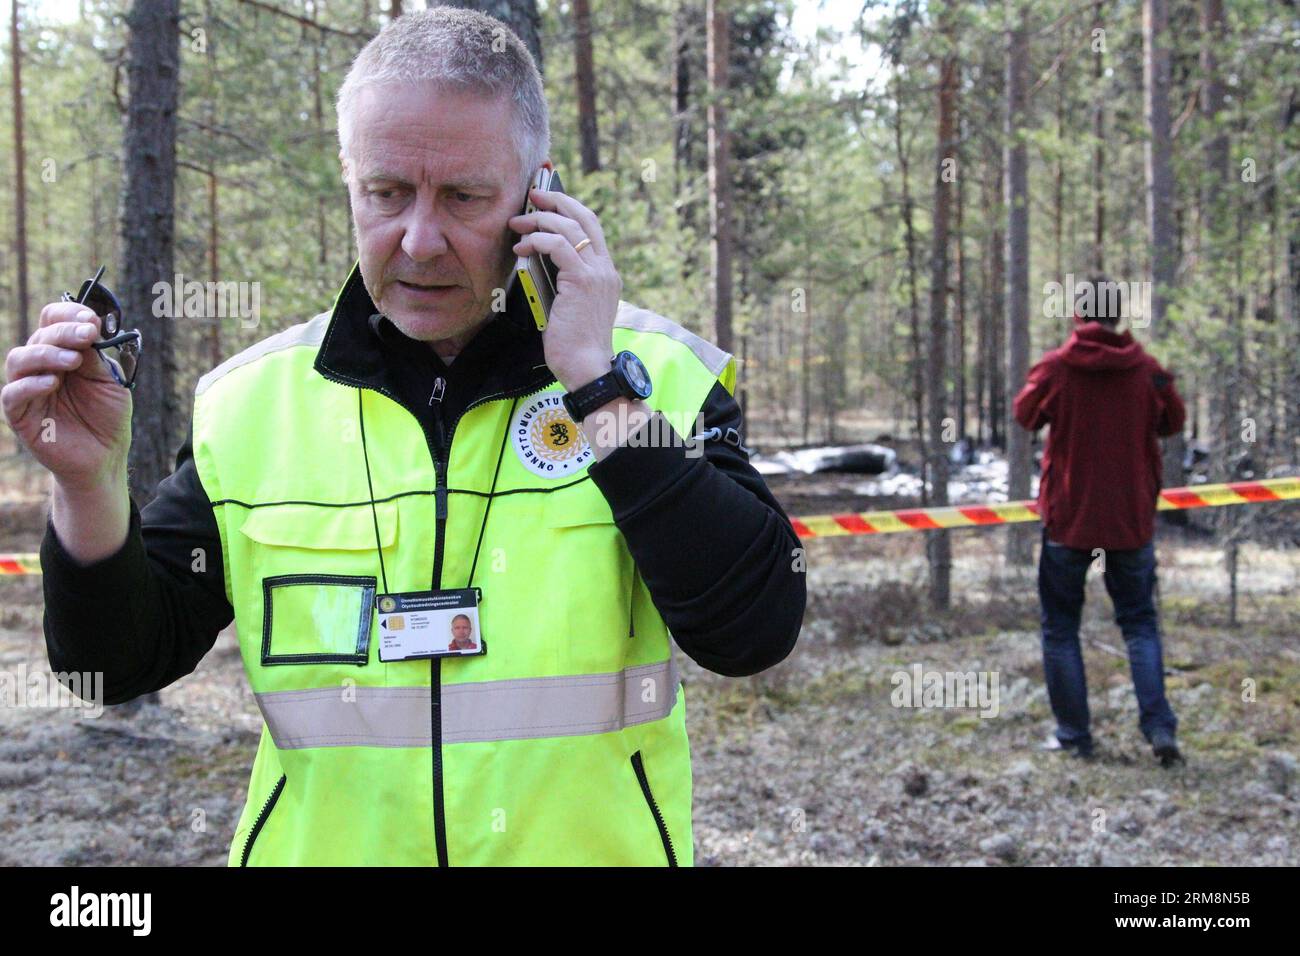 (140421) -- JAMIJARVI, April 21, 2014 (Xinhua) -- Head of the aviation investigation team Ismo Aaltonen works at the crash site near the Jamijarvi airport in southern Finland, April 21, 2014. A small passenger plane carrying 10 parachuters crashed on Sunday in the Satakunta region, Southwest Finland, causing eight dead. The pilot and two parachuters survived by ejecting from the aircraft before it crashed, and eight others were found dead around the wreckage. (Xinhua/Li Jizhi) FINLAND-JAMIJARVI-PLANE CRASH PUBLICATIONxNOTxINxCHN   April 21 2014 XINHUA Head of The Aviation Investigation Team  A Stock Photo